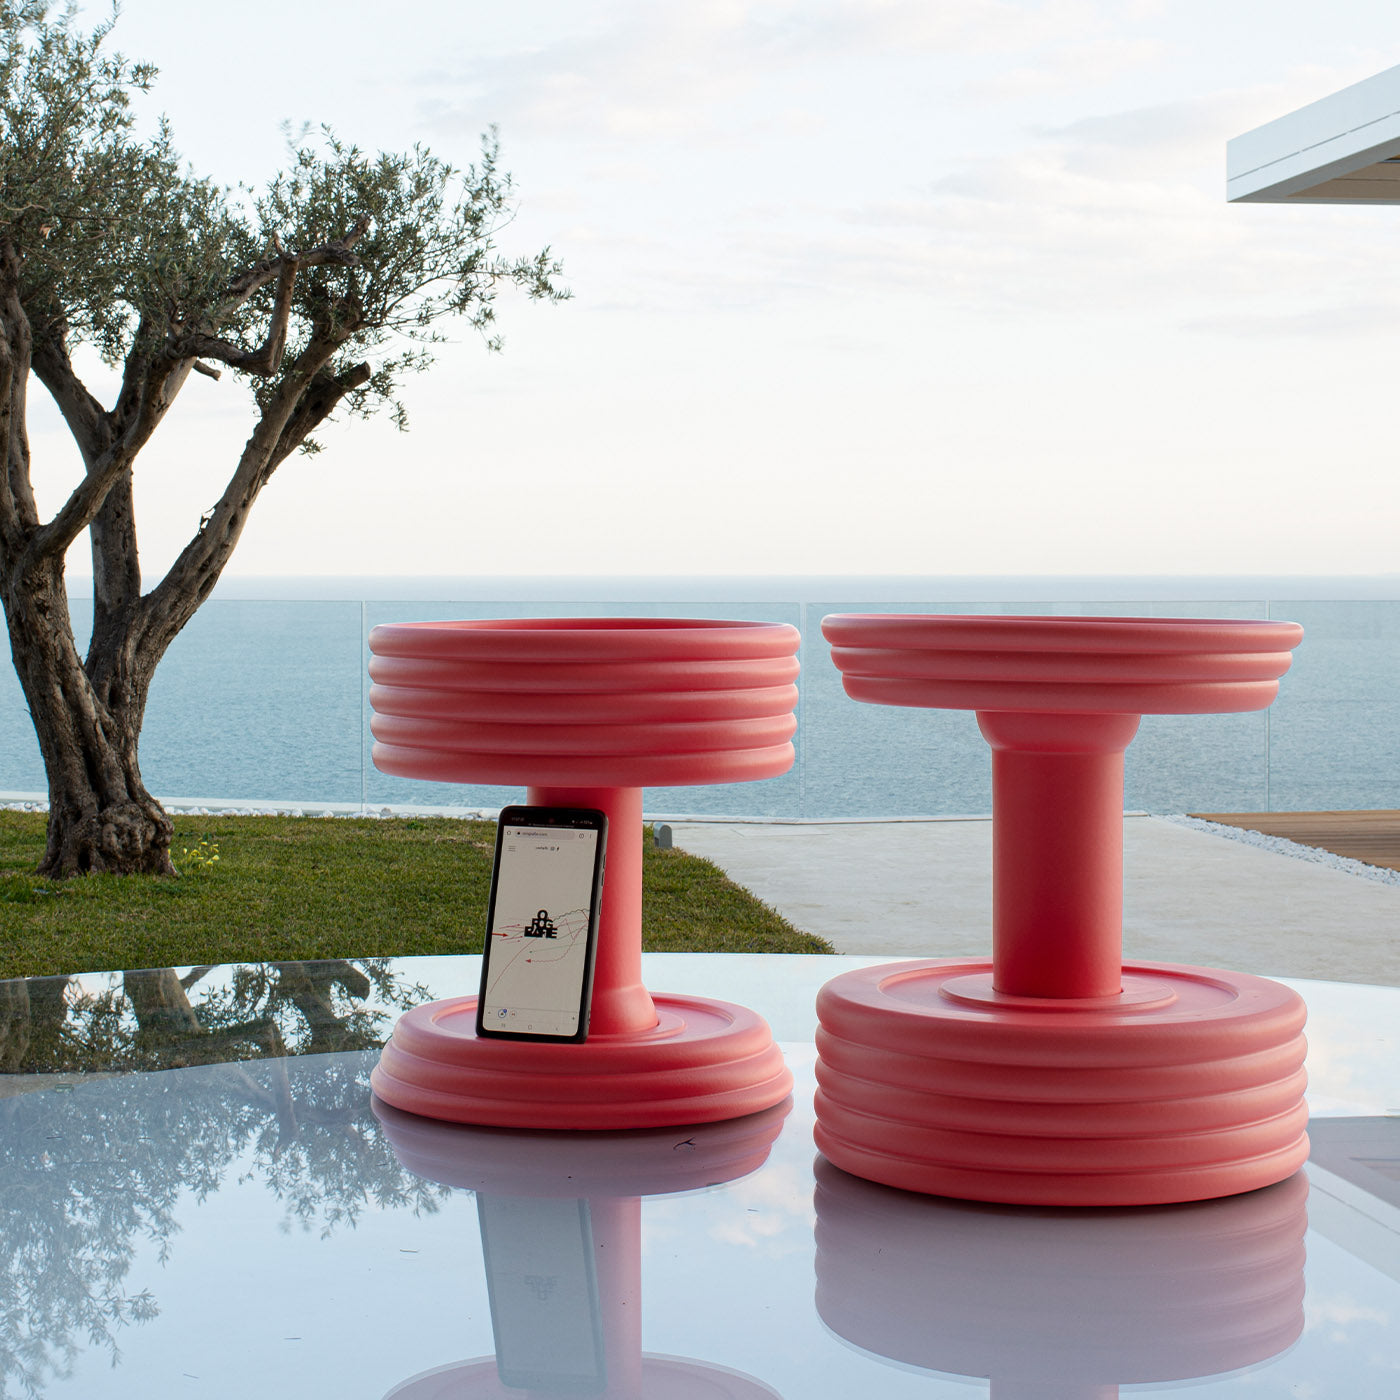 Triplex A Red Ceramic Centerpiece Limited Edition by Andrea Branciforti - Alternative view 2